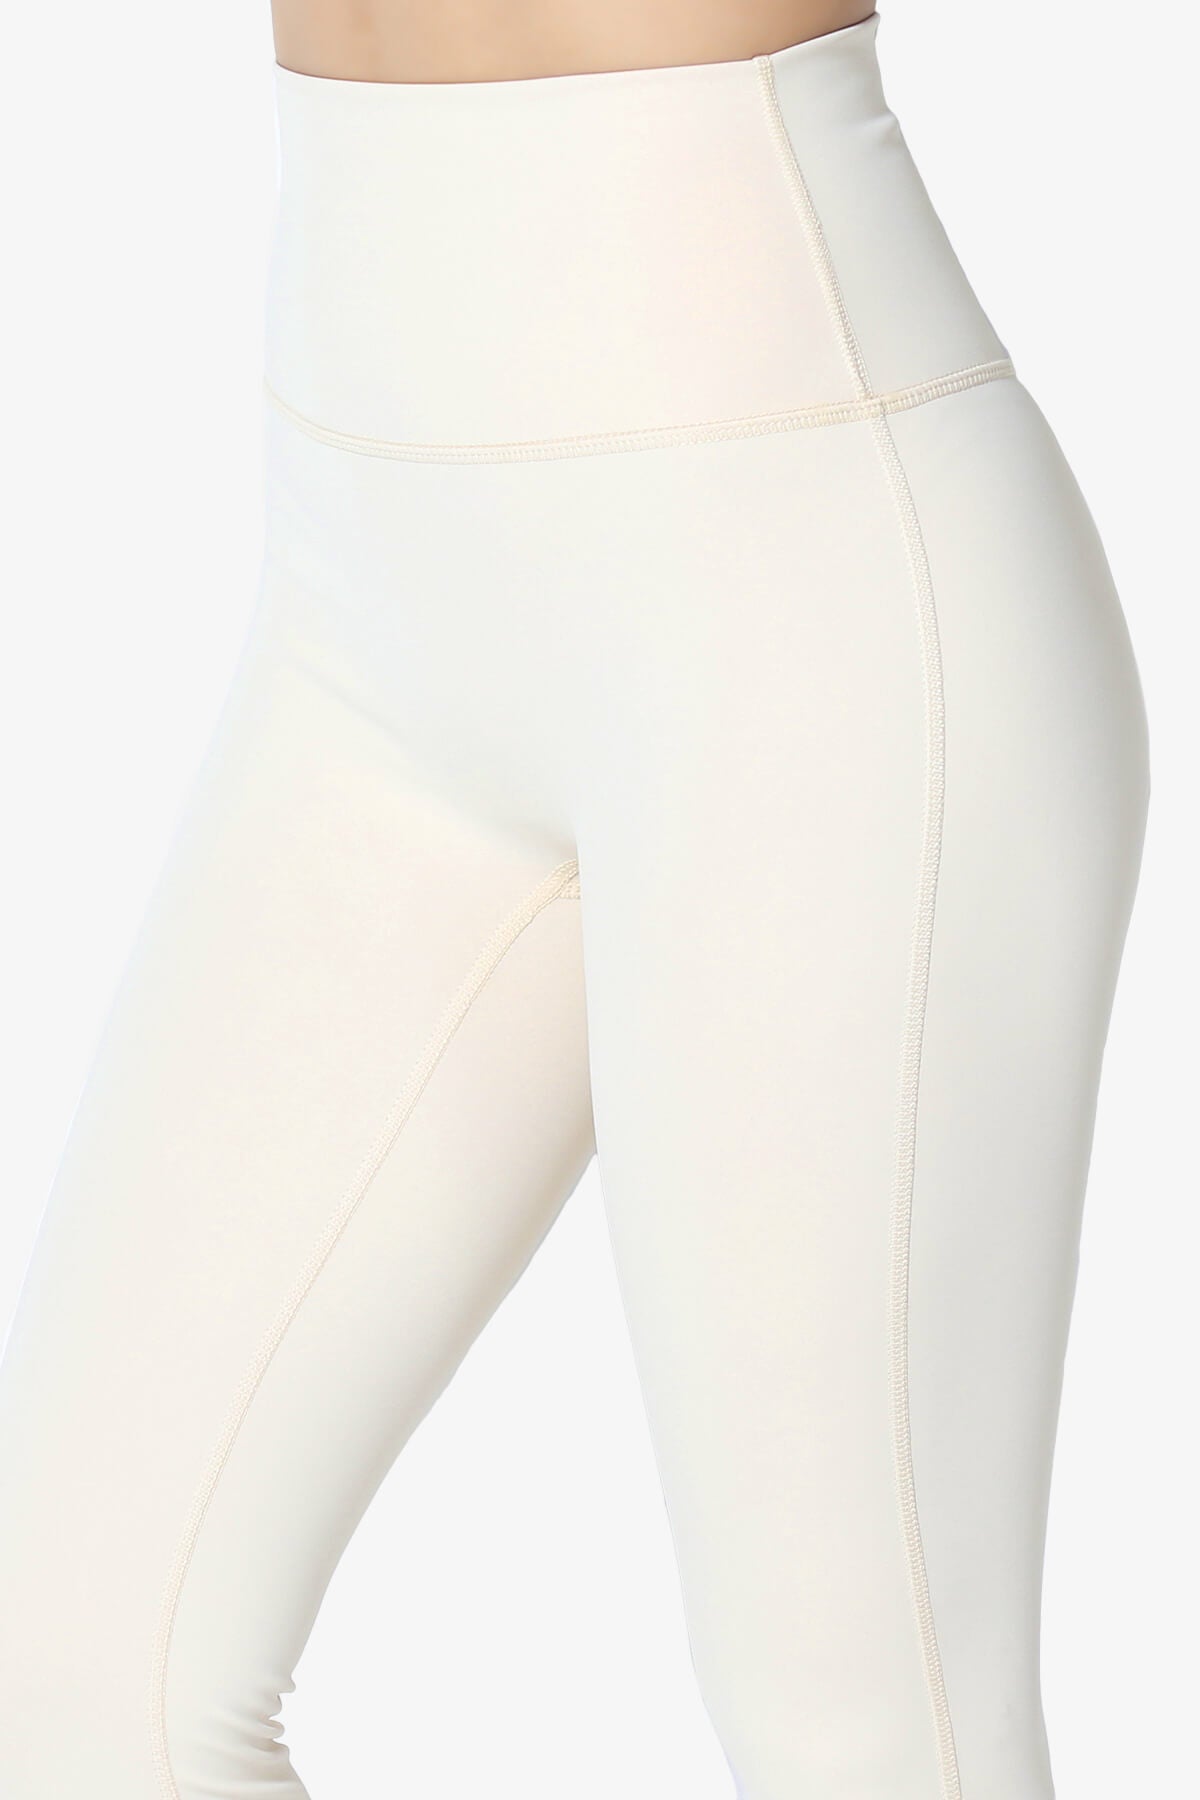 ODODOS Women's High Waist Yoga Pants with Pockets,Tummy Control,Workout  Pants Running 4 Way Stretch Yoga Leggings with Pockets,White,Large in Oman